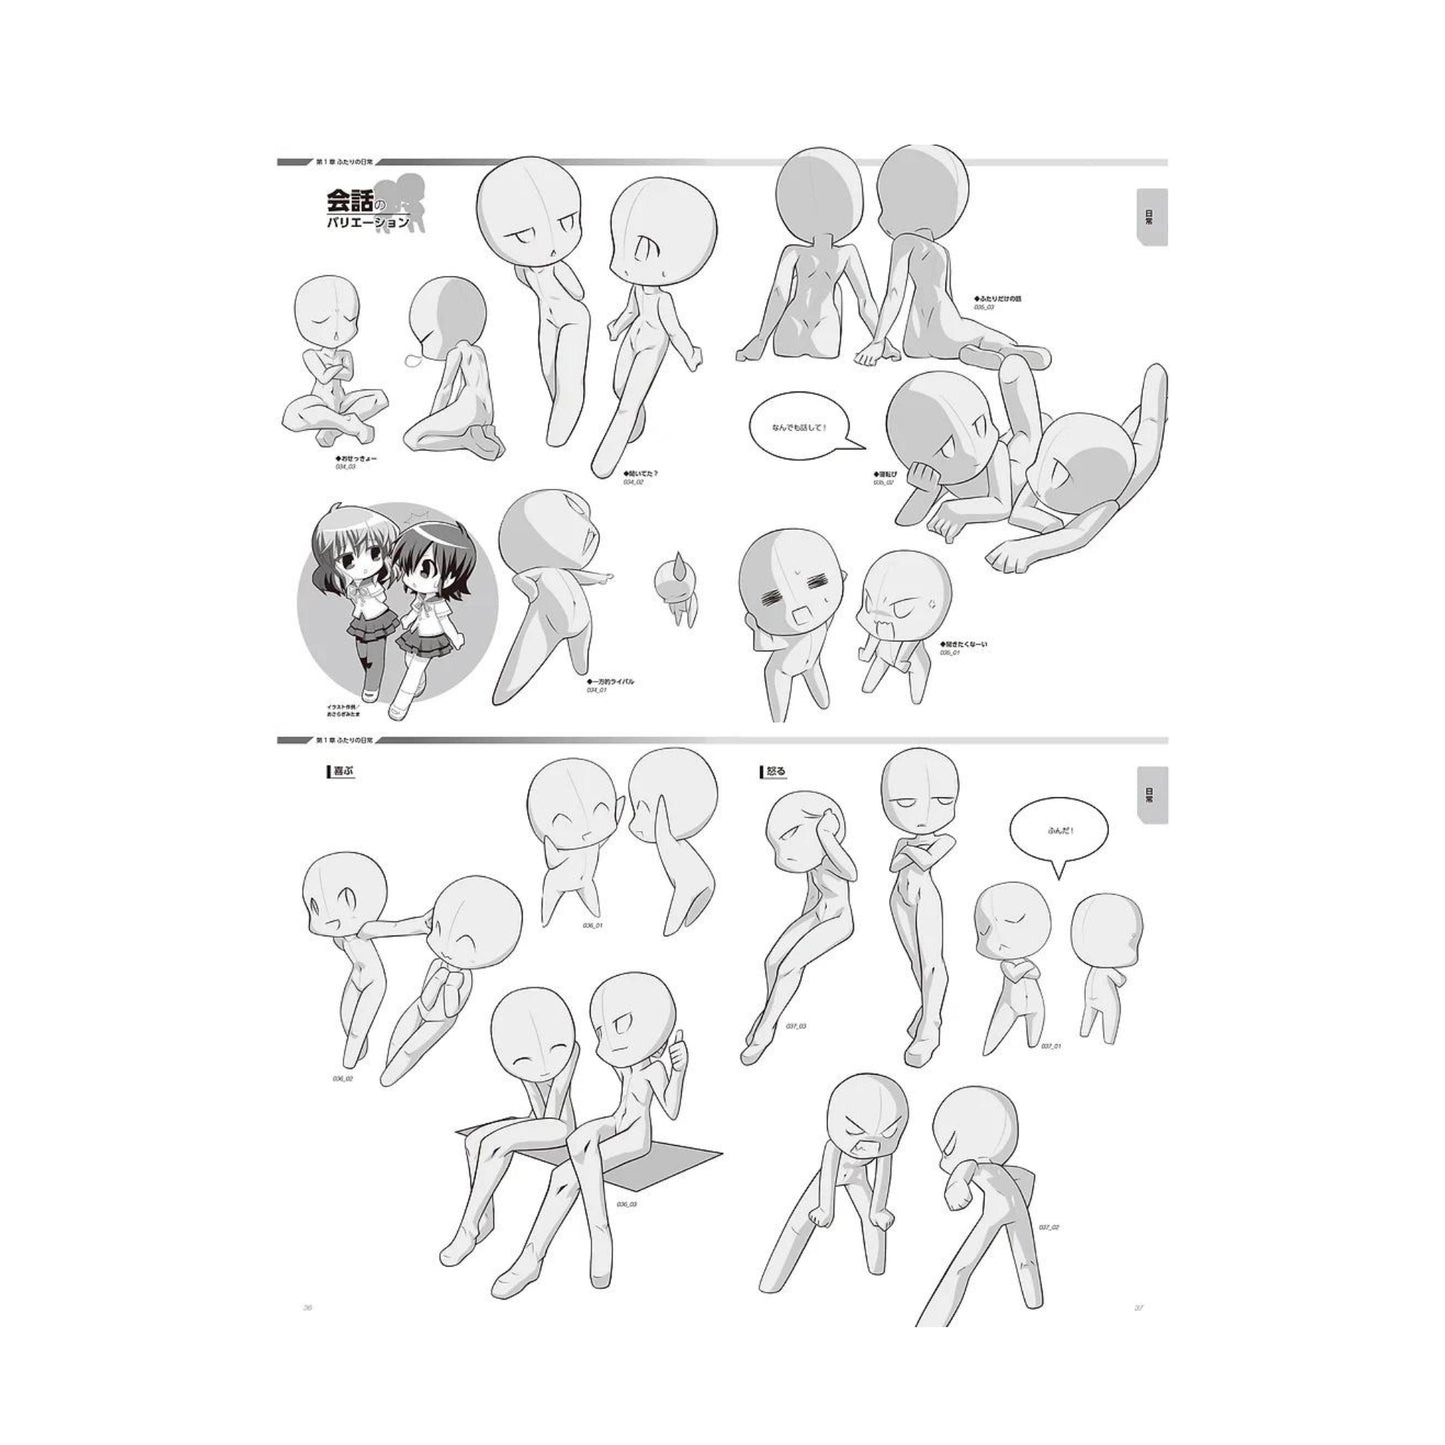 How to draw - jap. Zeichenbuch - Super Deformed Pose Collection: Paare inkl. CD-ROM